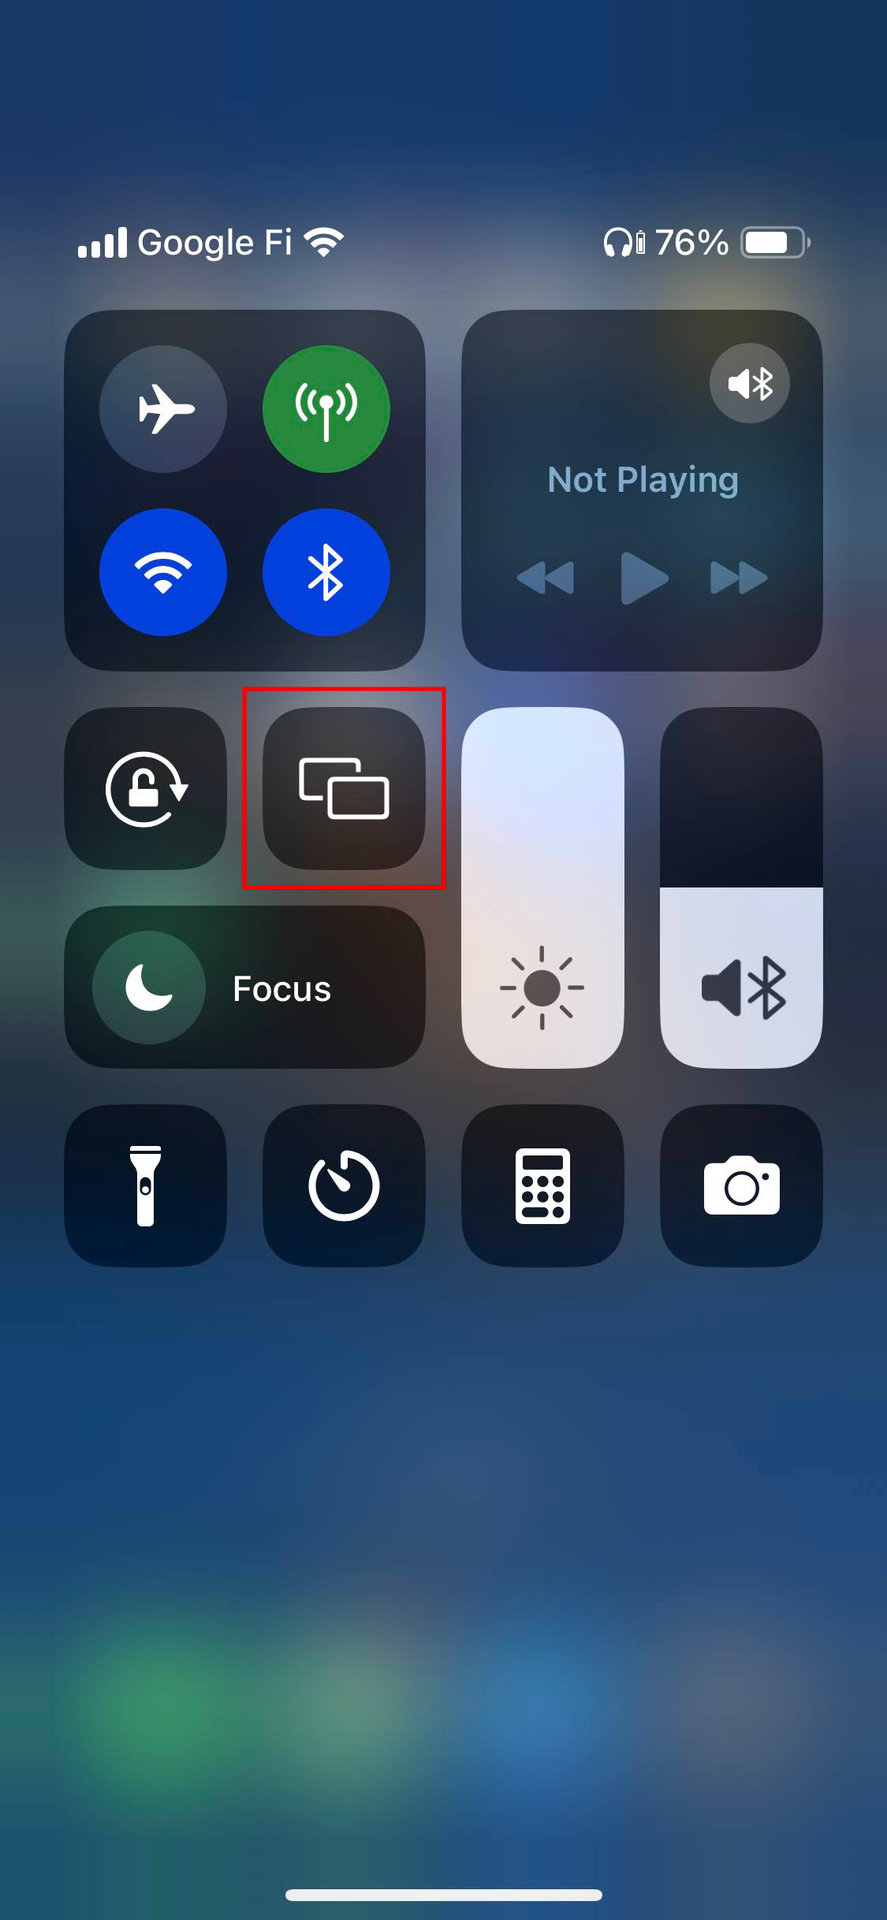 How to mirror your iPhone screen using AirPlay (1)